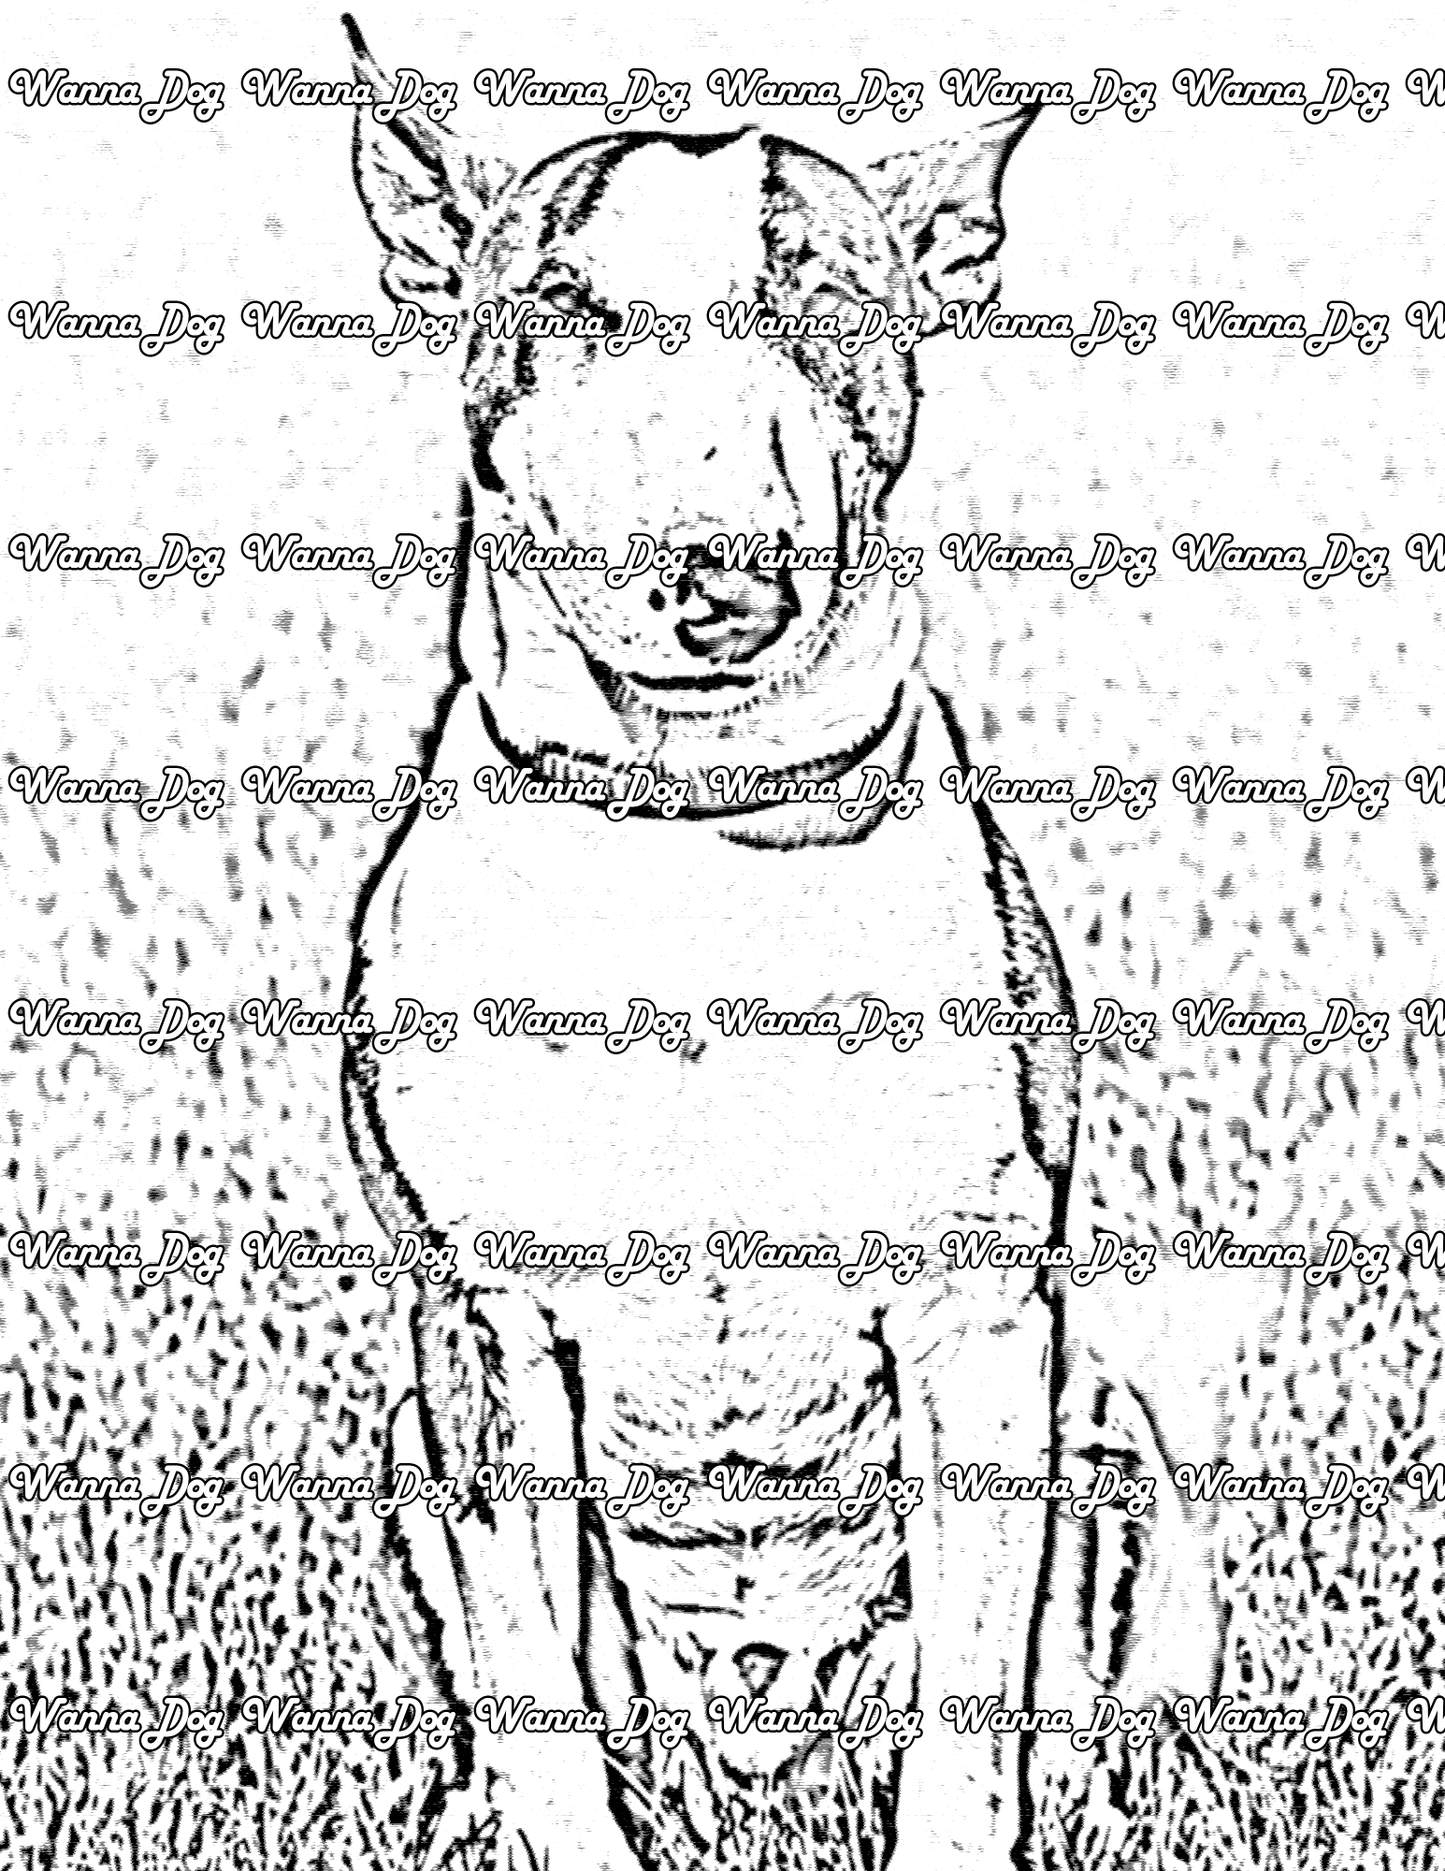 Bull Terrier Coloring Page of a Bull Terrier sitting in the grass